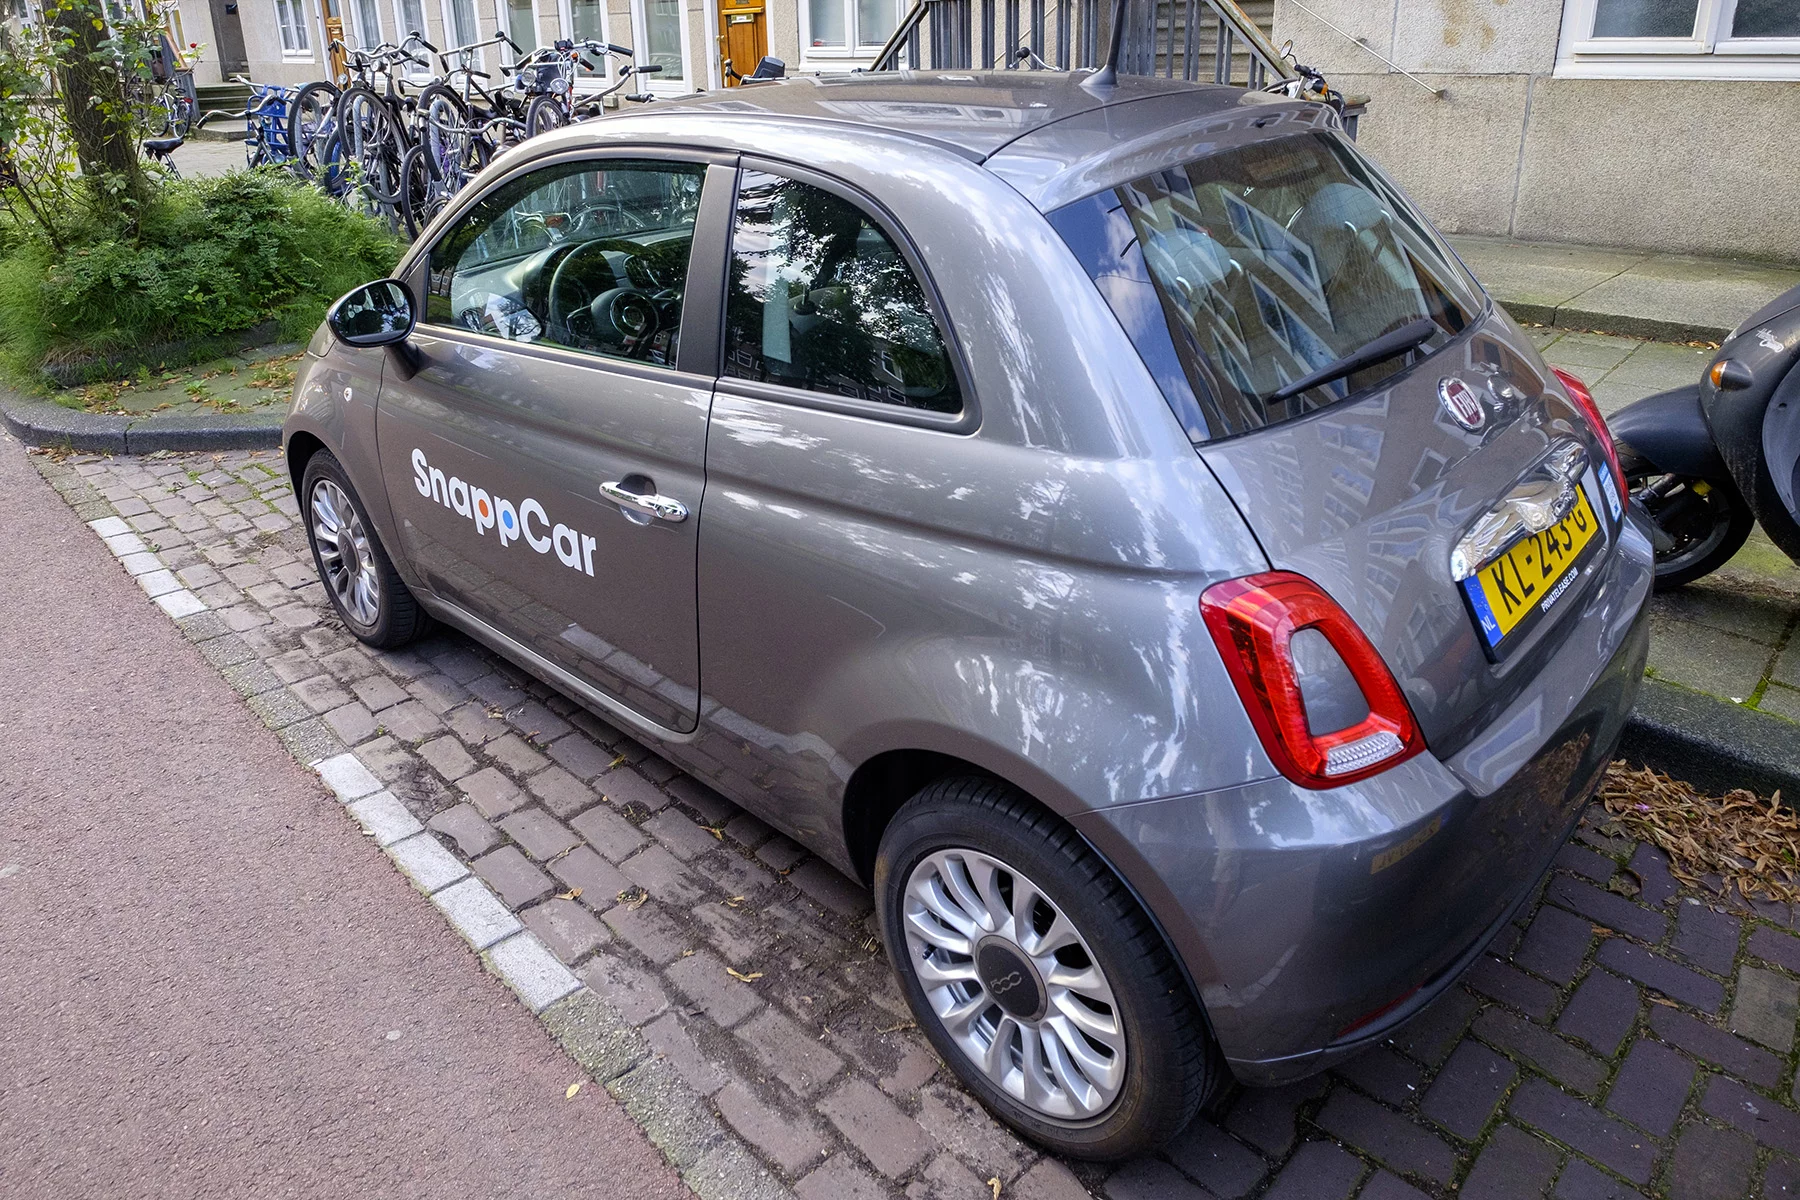 A car from the SnappCar car-sharing platform in Amsterdam, Netherlands